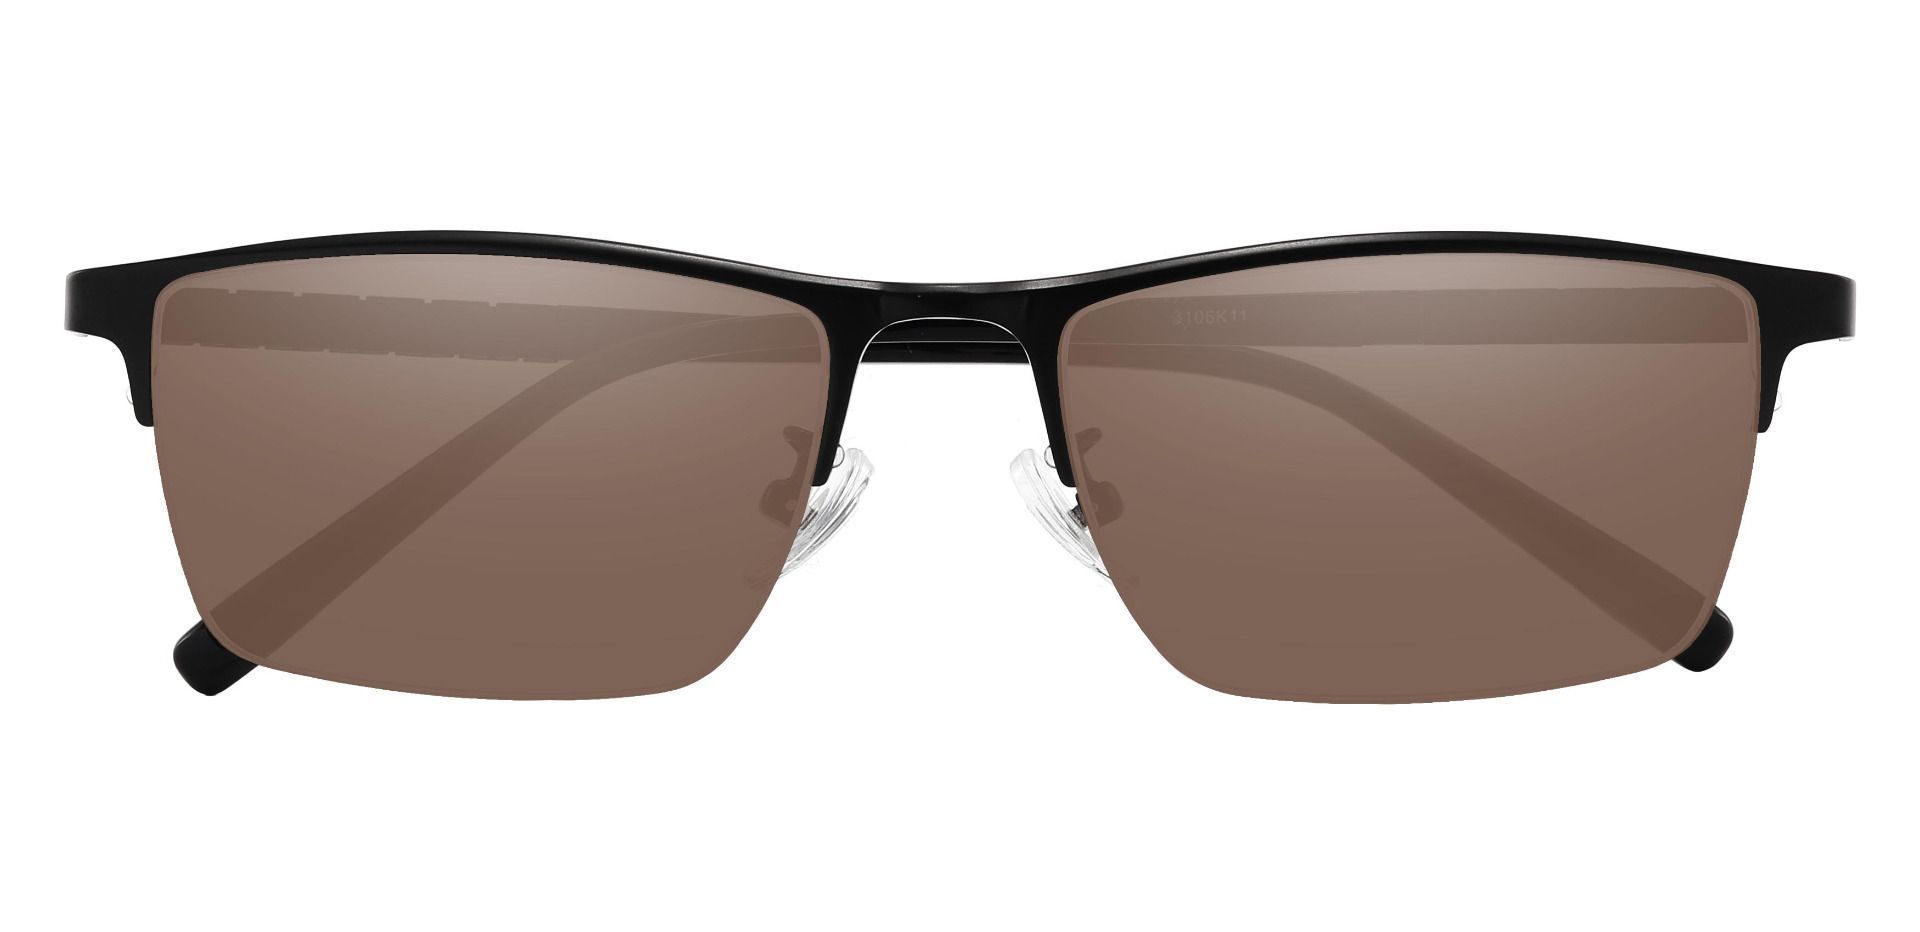 Maine Rectangle Lined Bifocal Sunglasses - Black Frame With Brown Lenses